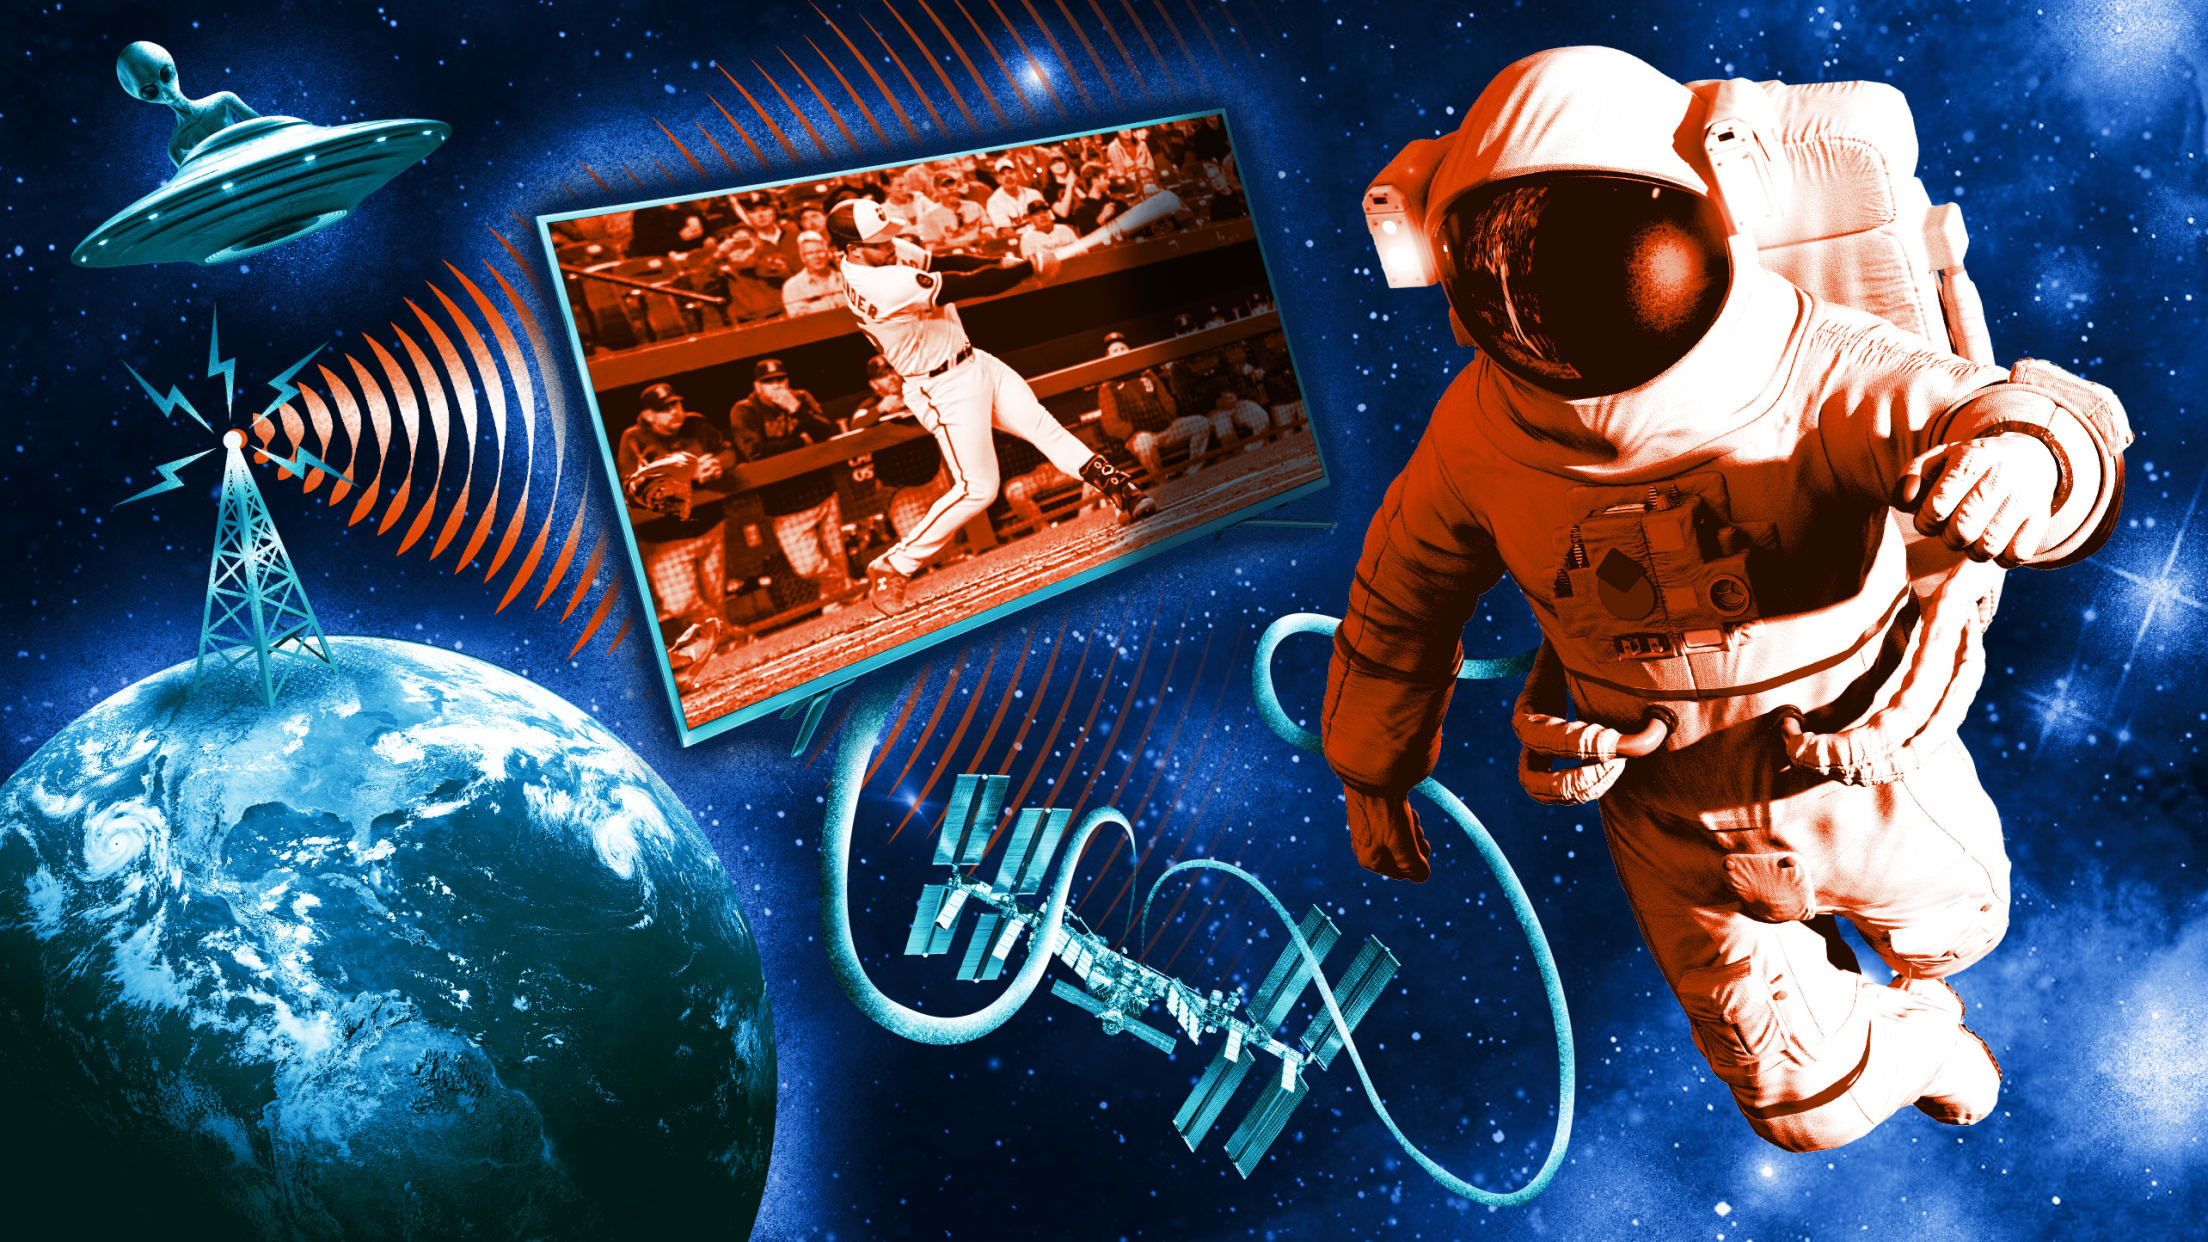 A photo illustration of an astronaut on a spacewalk with a video screen showing an Orioles game floating above the Earth